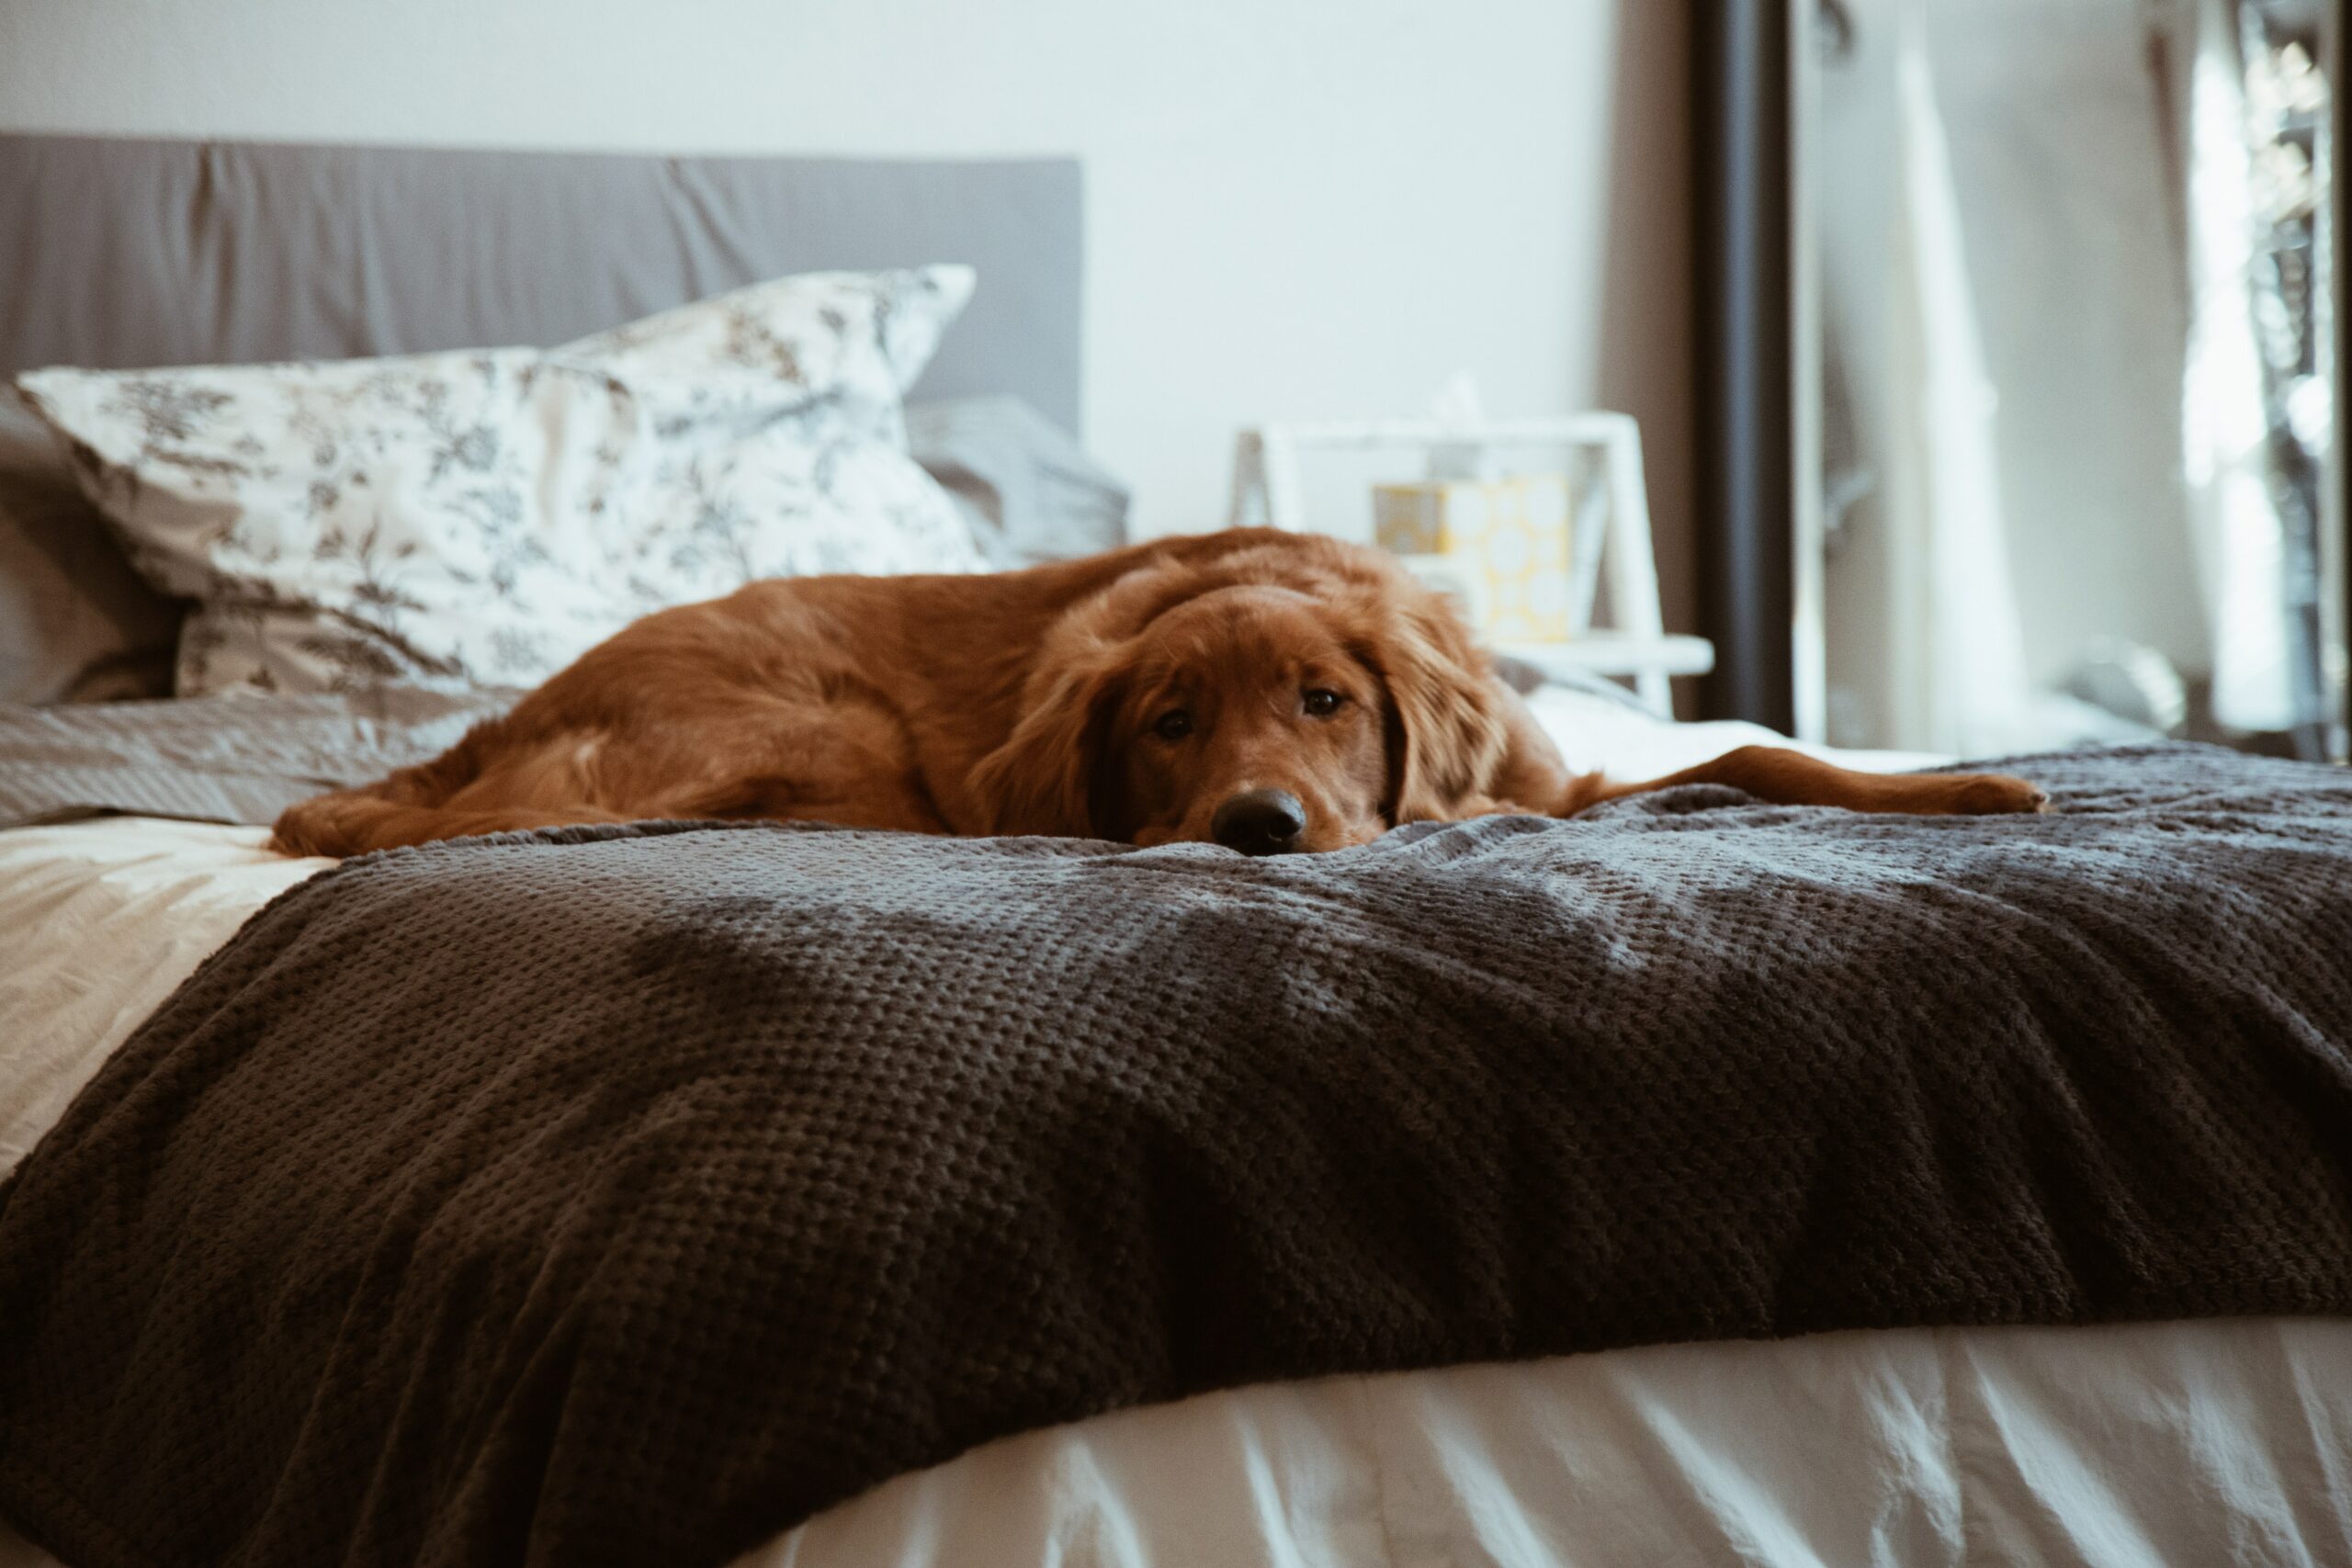 A Sleepy Safety Guide to Being Bedroom Buddies With Your Pet